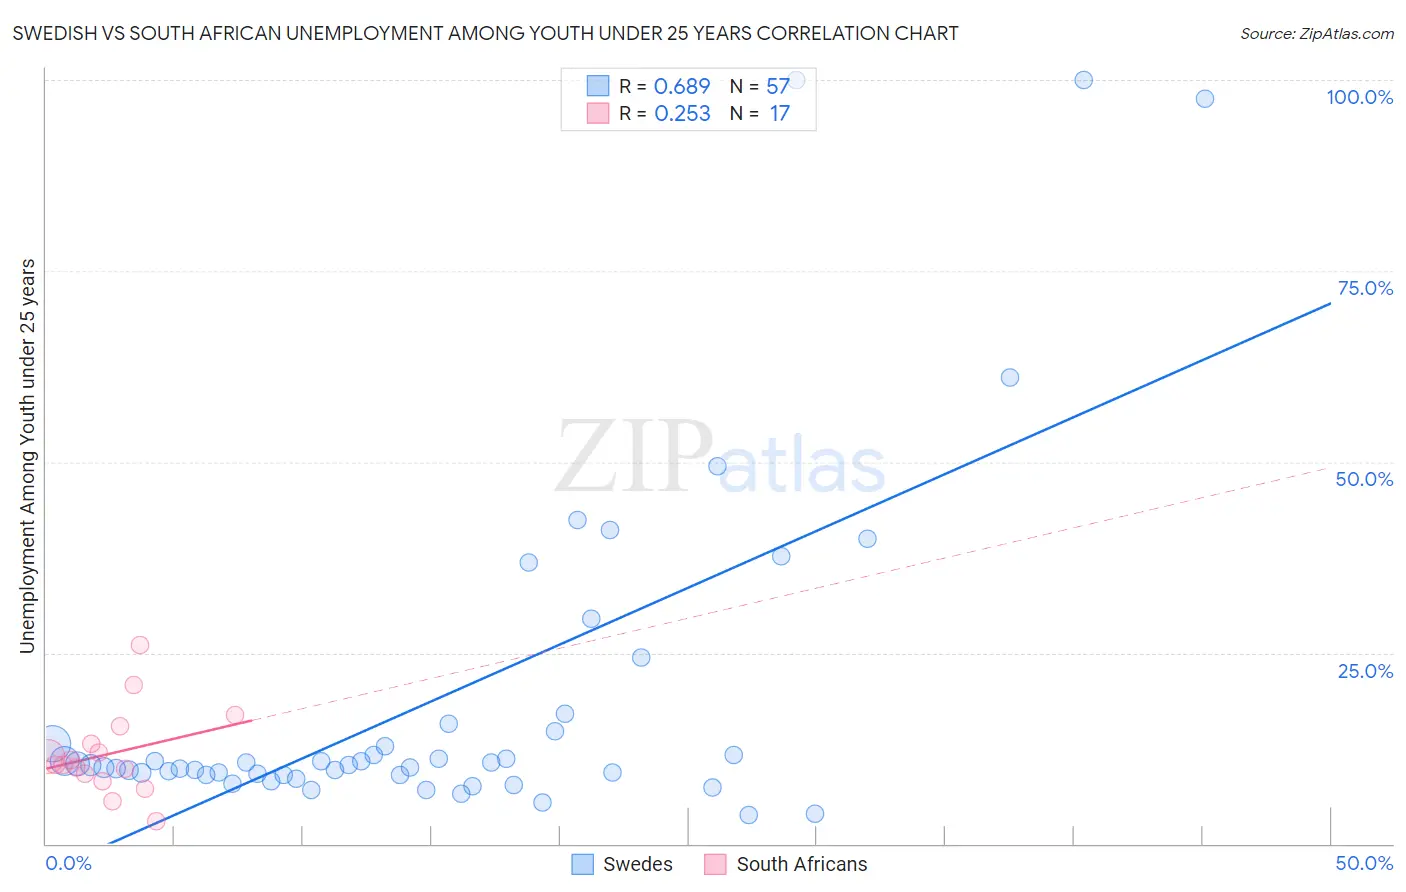 Swedish vs South African Unemployment Among Youth under 25 years